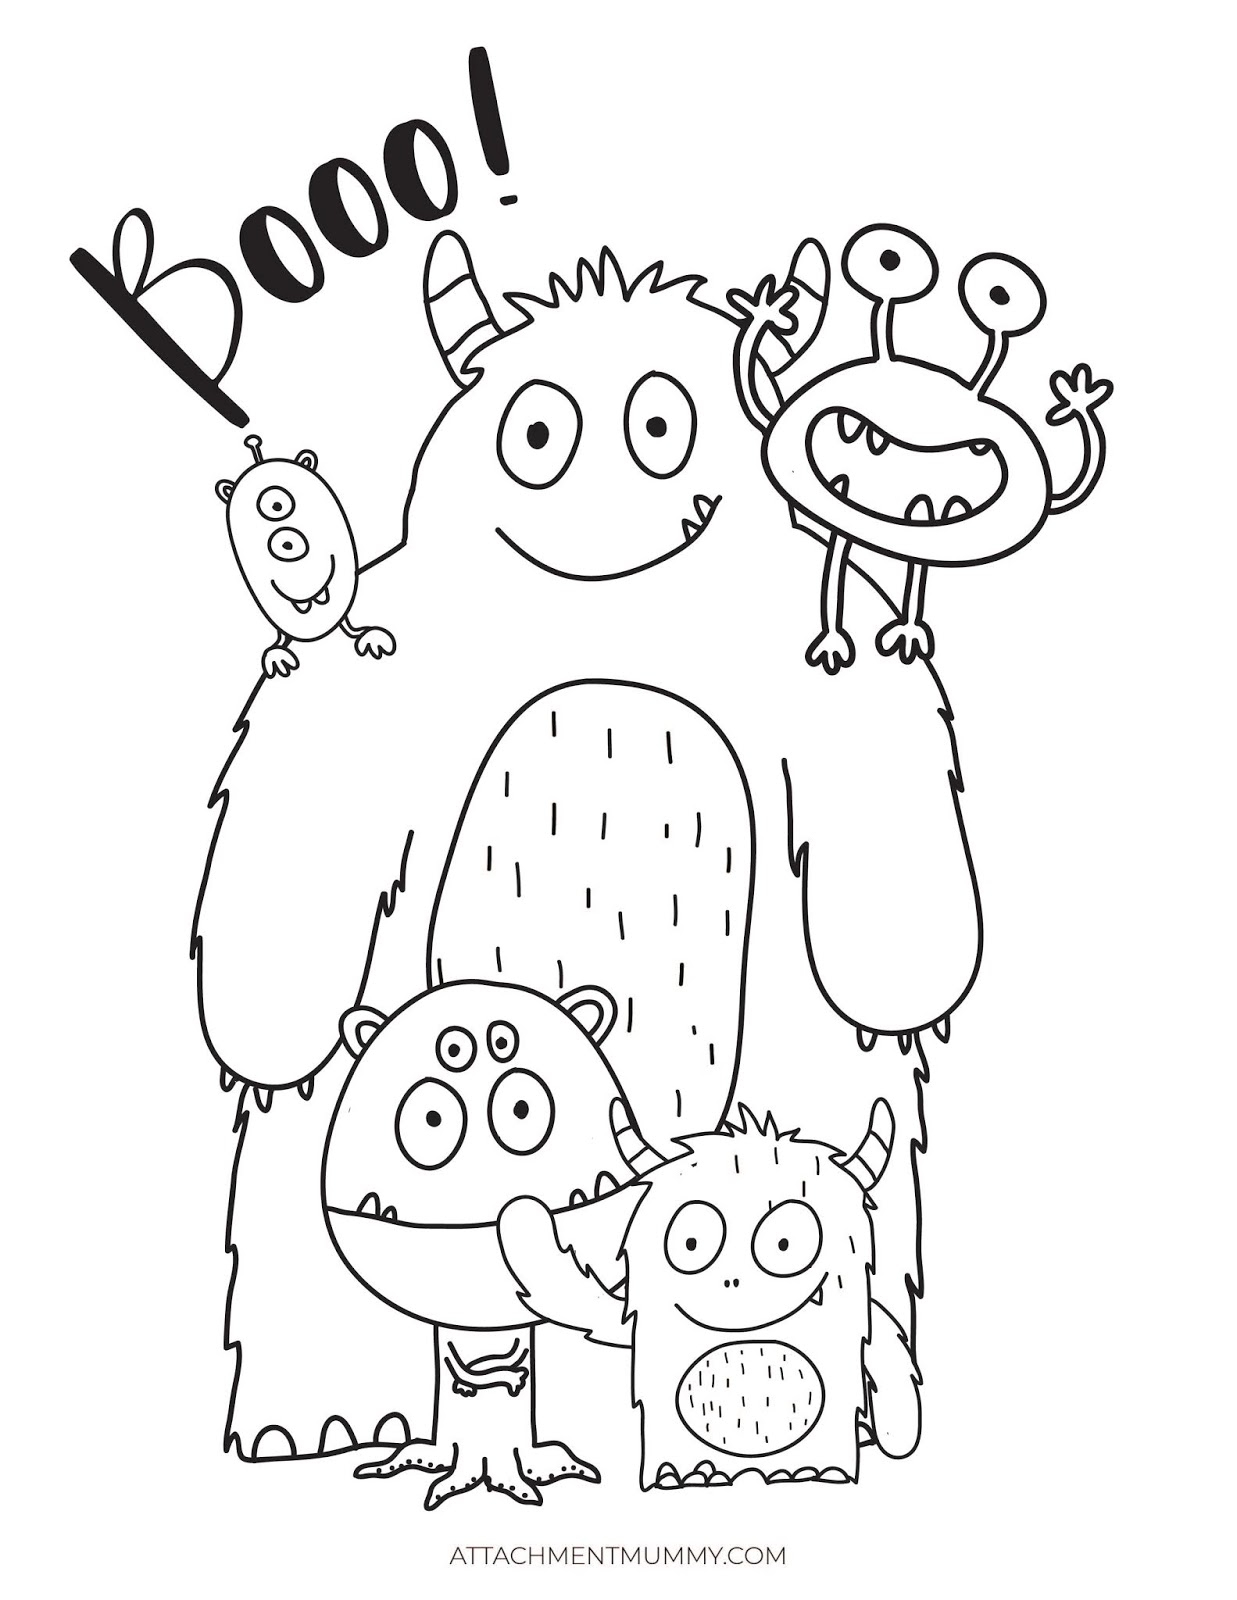 free-monsters-colouring-and-activity-pack-printable-for-kids